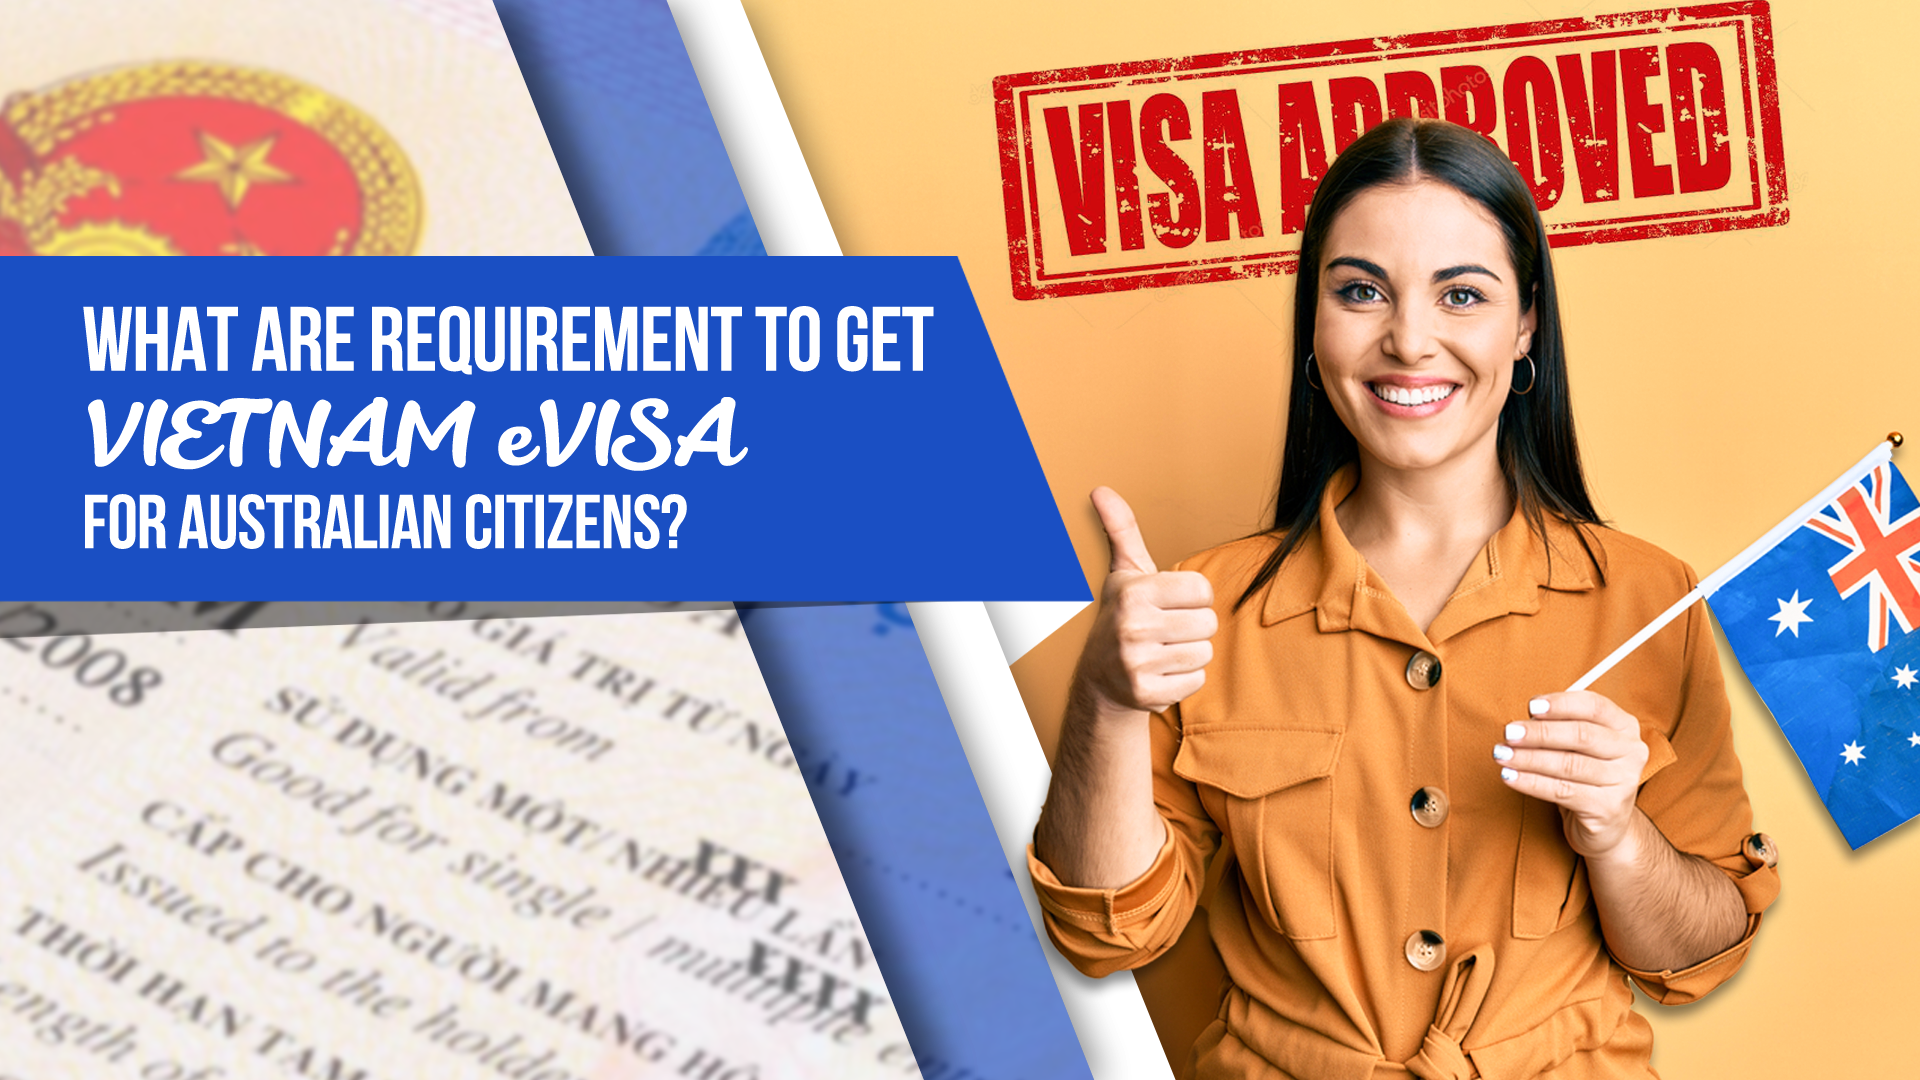 What are requirements to get Vietnam evisa for Australian citizens